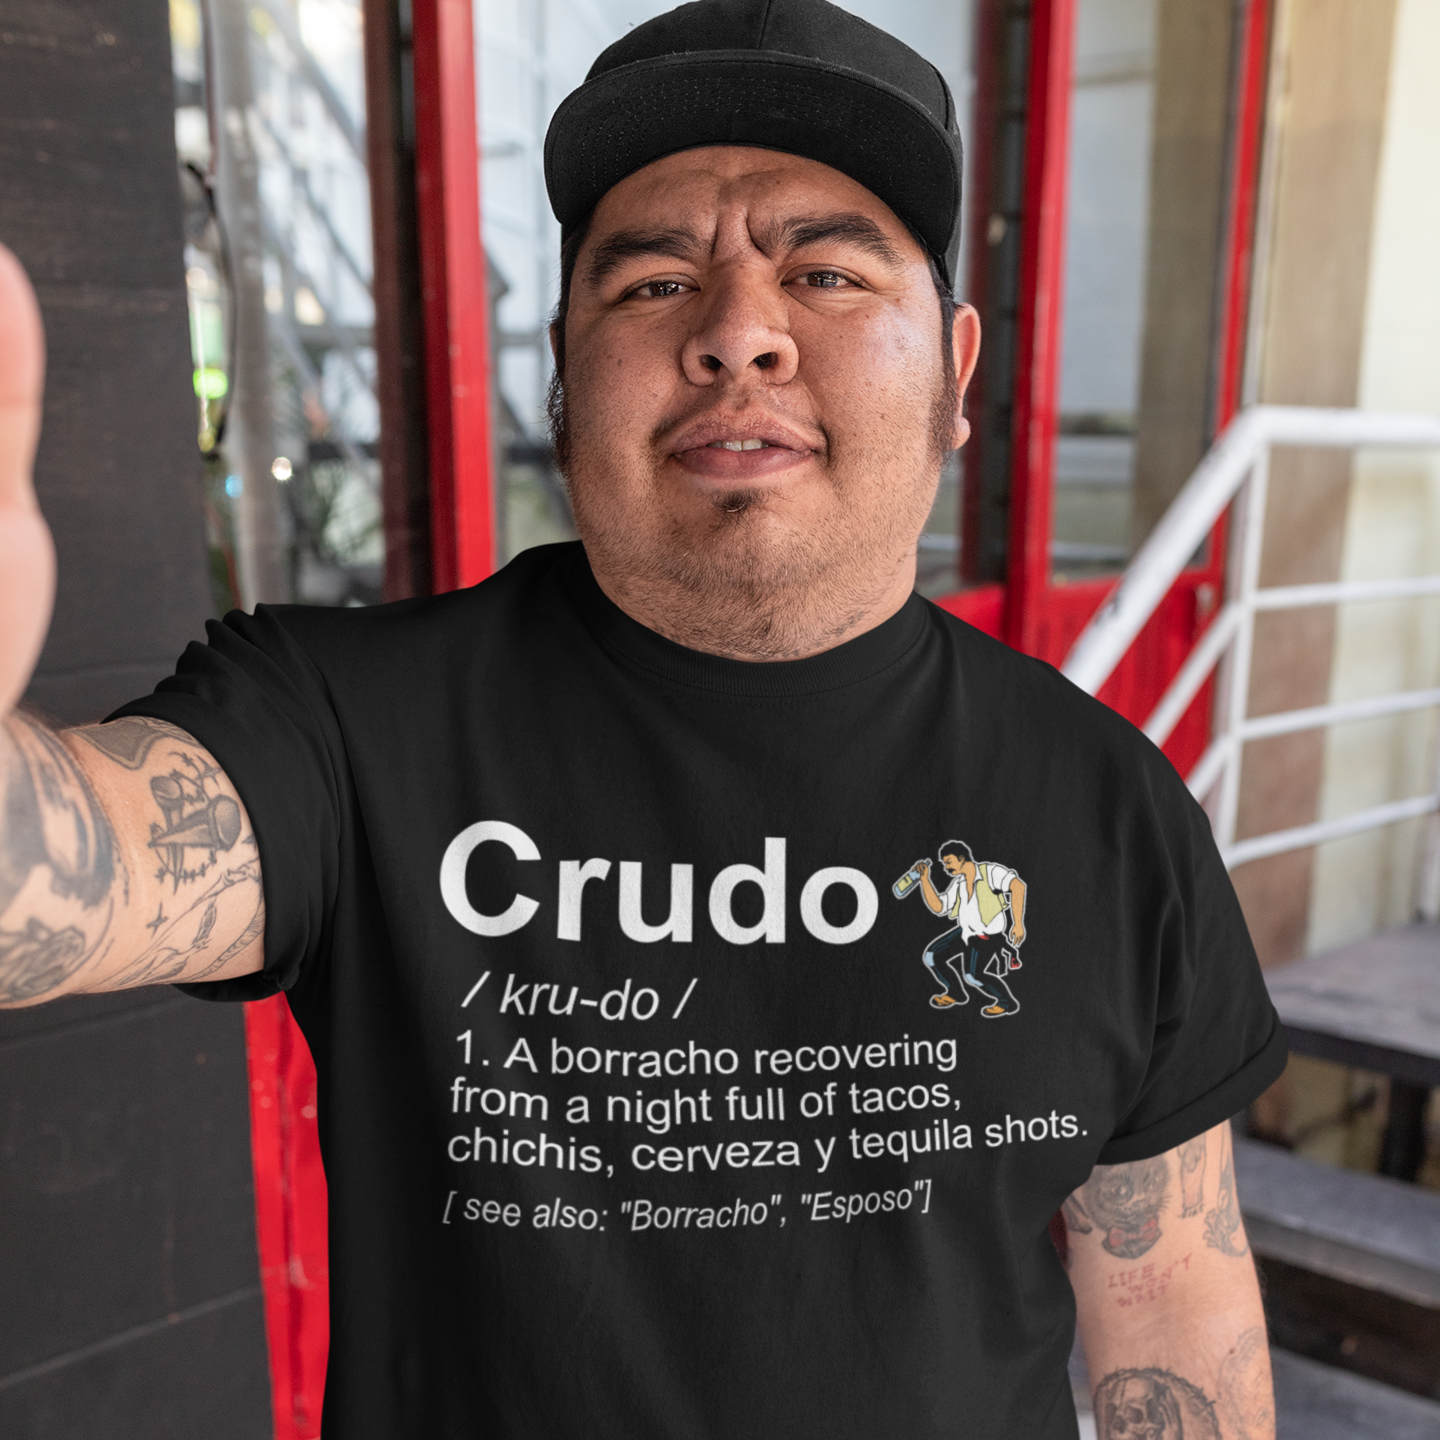 crudo funny latino shirt. A recovering borracho from a night full of tacos, chichis, cerveza y tequila shots.